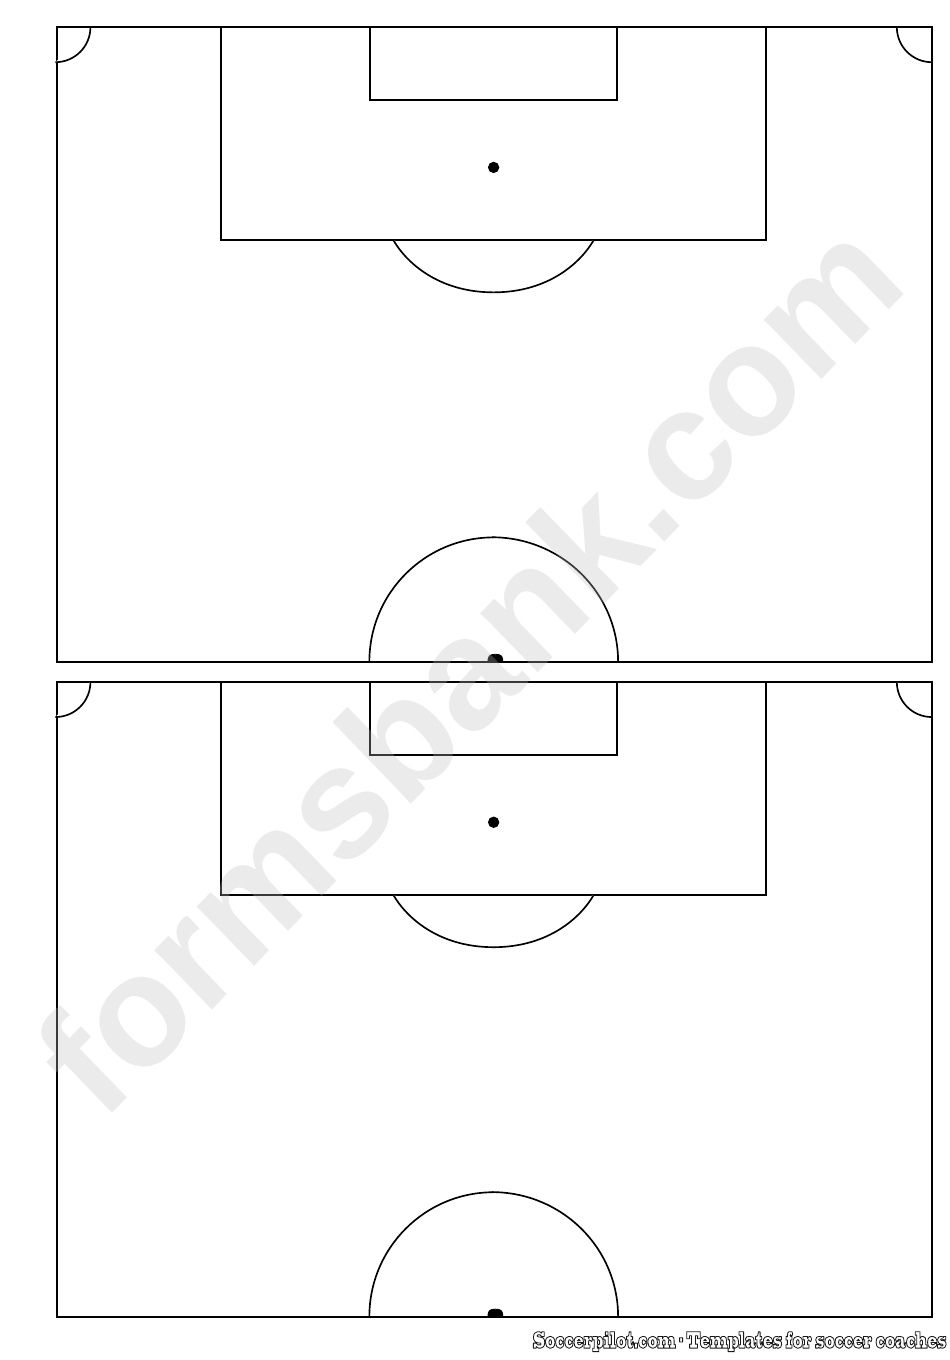 2x Horizontally Soccer HalfPitches Field Template printable pdf download